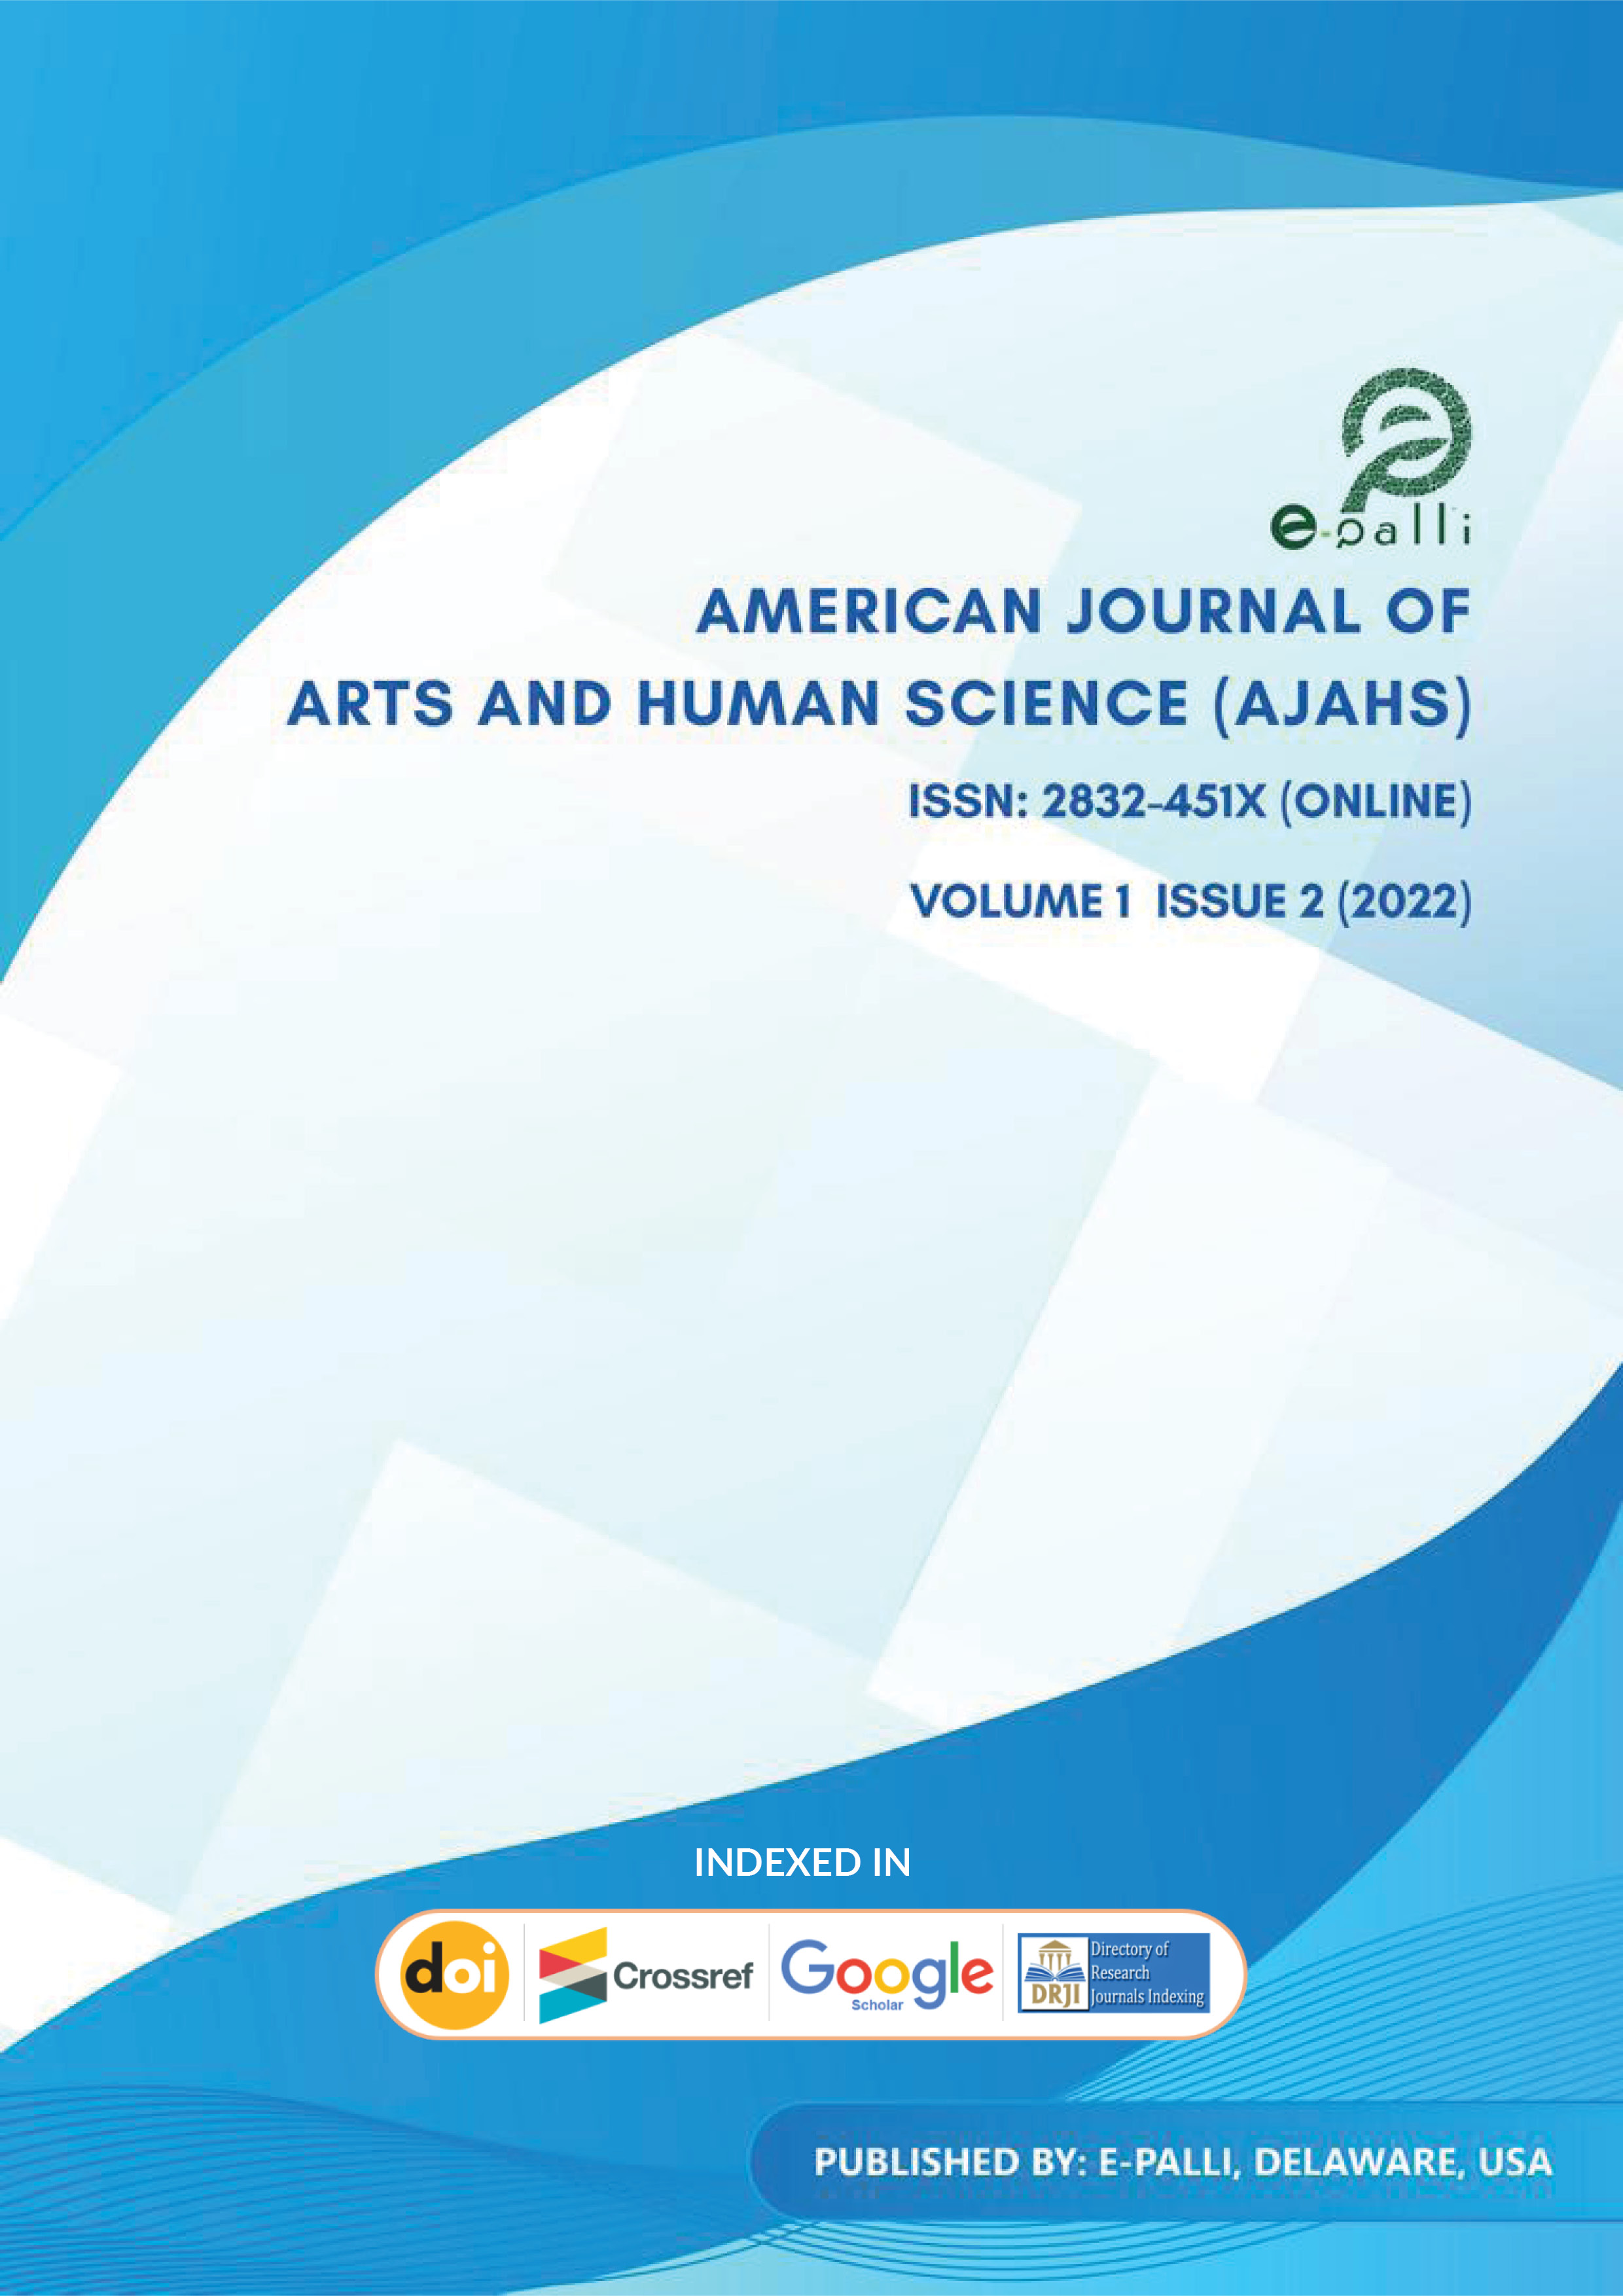 					View Vol. 1 No. 2 (2022): American Journal of Arts and Human Science
				